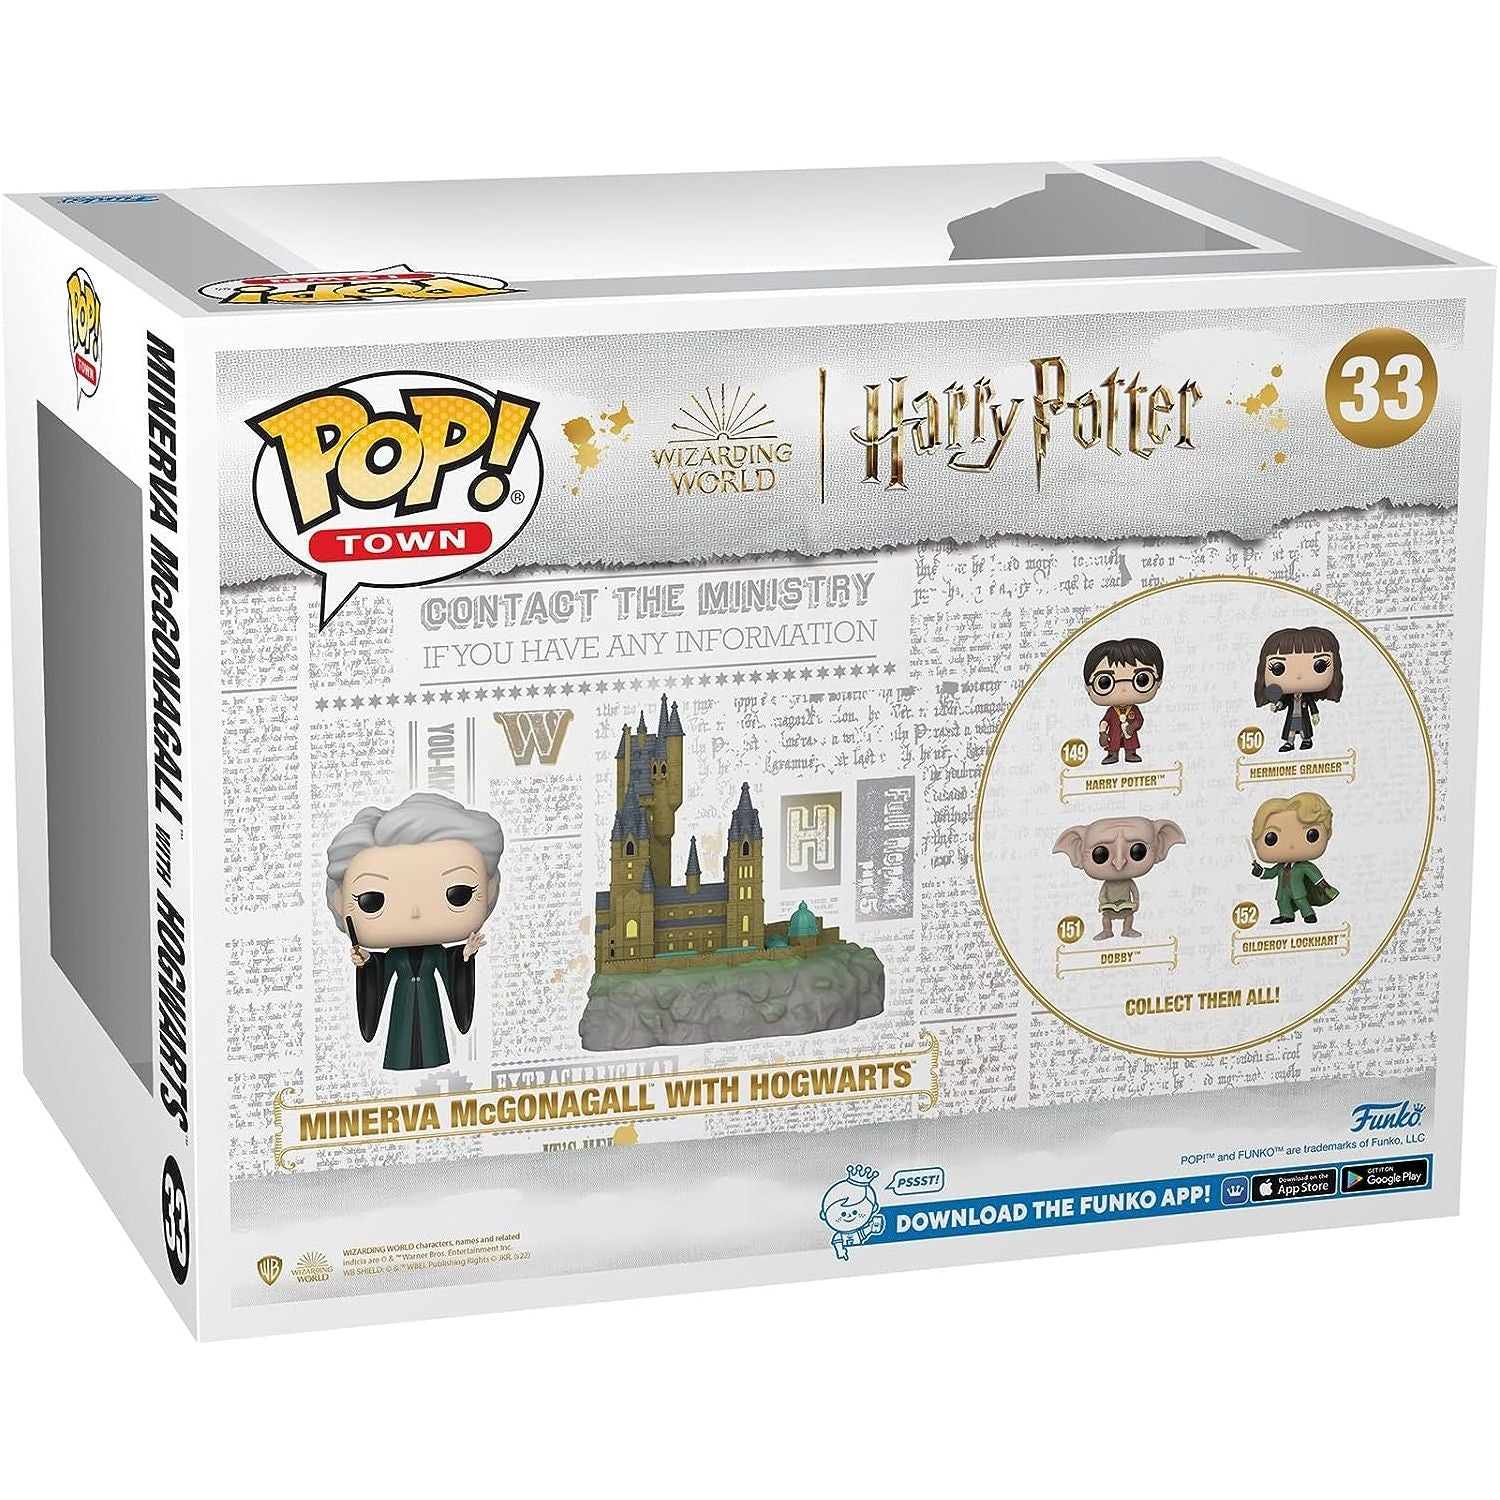 Funko Pop! Deluxe Town Harry Potter Chamber of Secrets 20th Anniversary - Minerva with Hogwarts